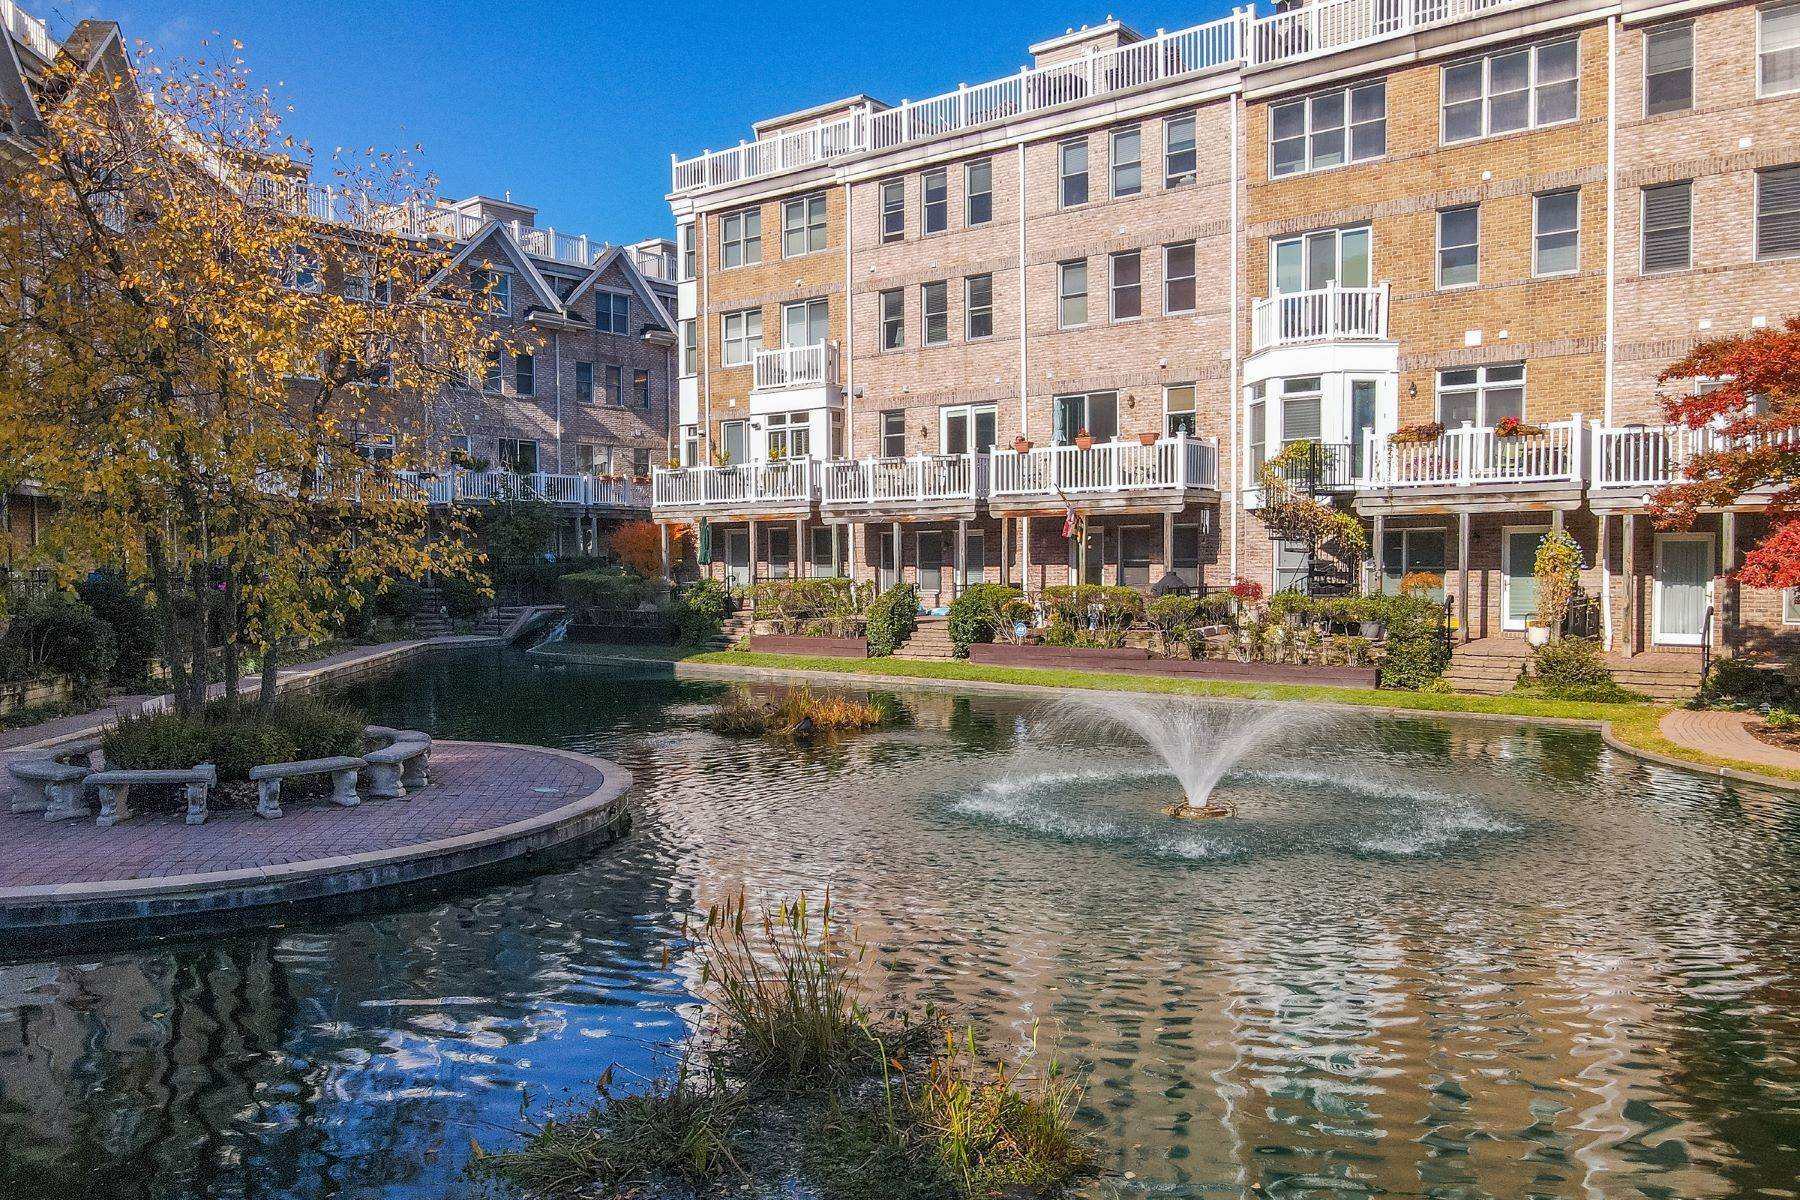 Townhouse for Sale at The Townes at Harborview 1239 Harbor Island Walk Baltimore, Maryland 21230 United States